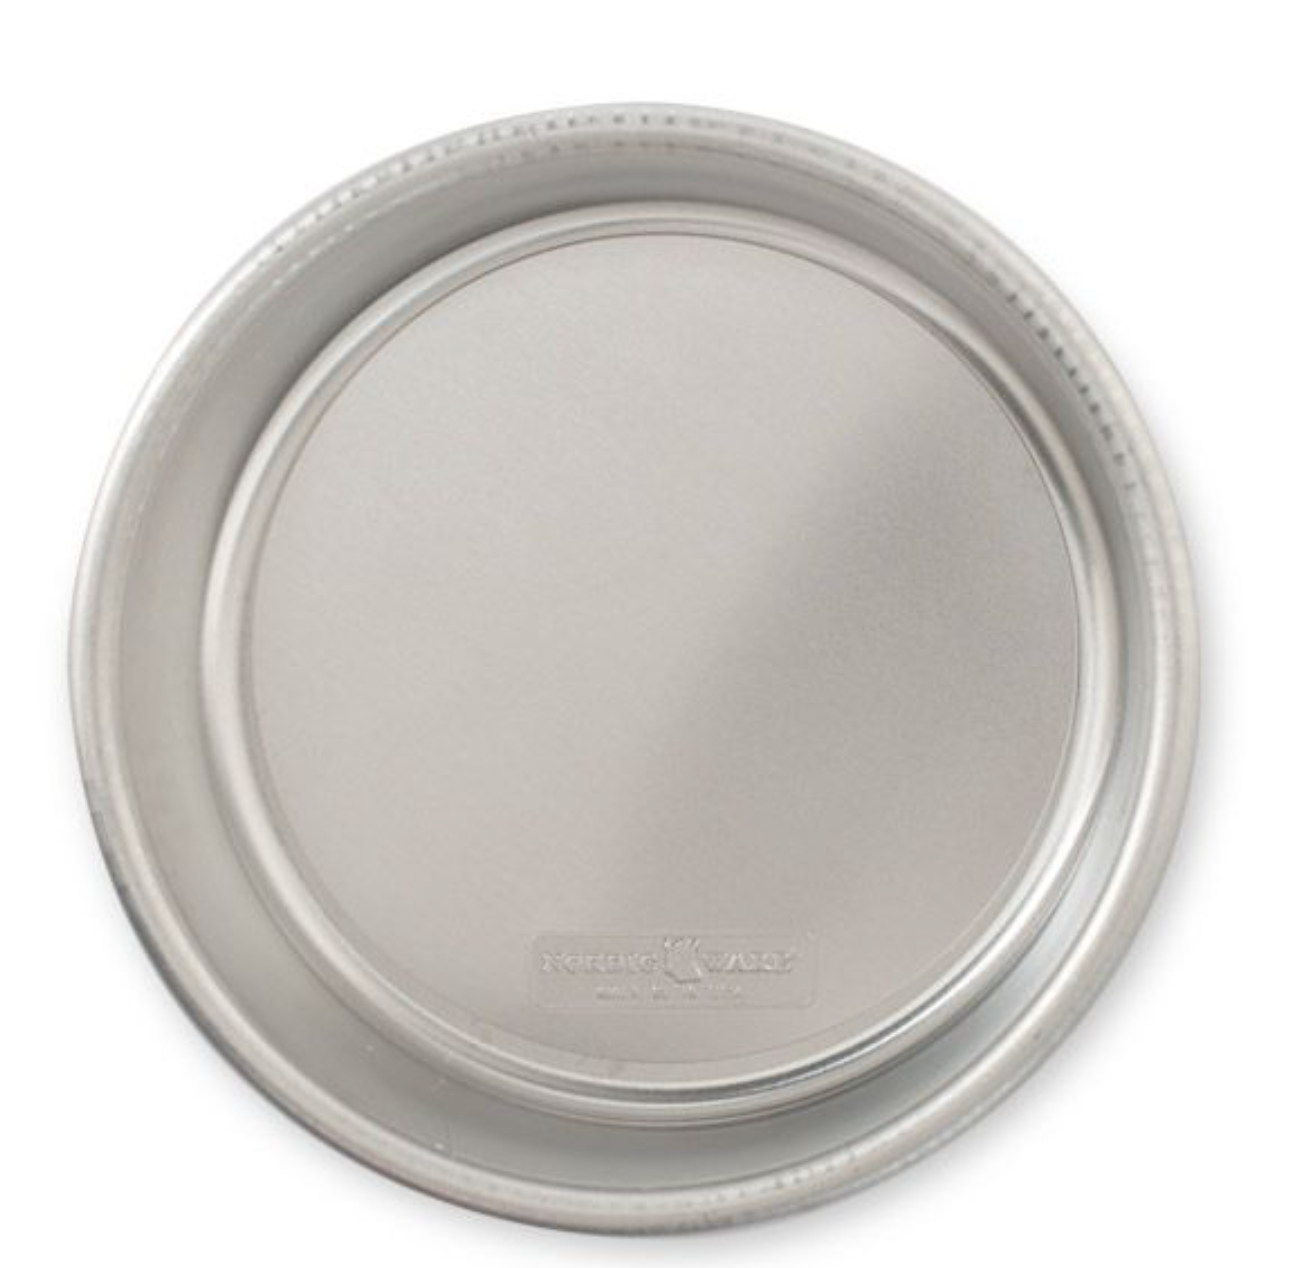 Nordic Ware High Dome 10 Pie Pan with Lid